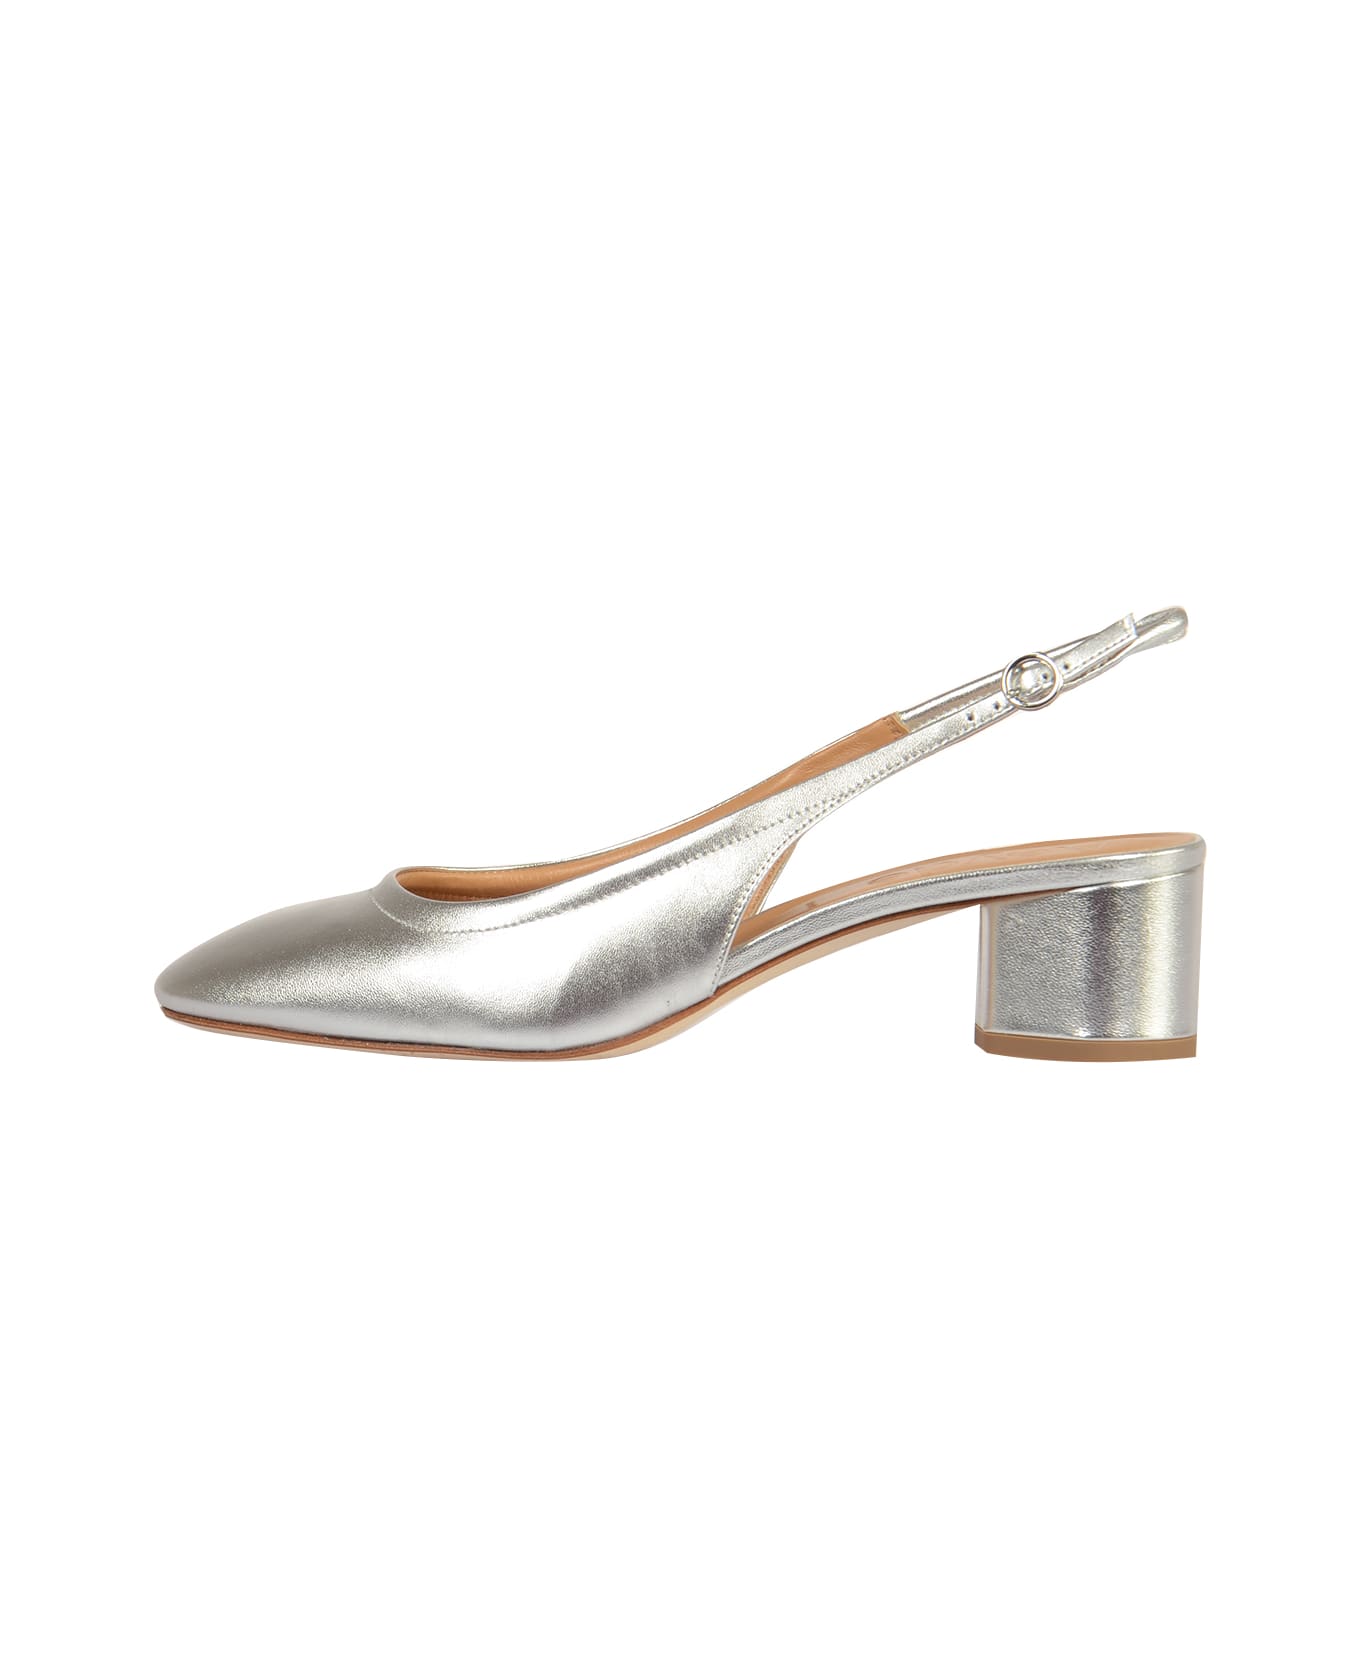 aeyde Romy Laminated Sandals - Silver